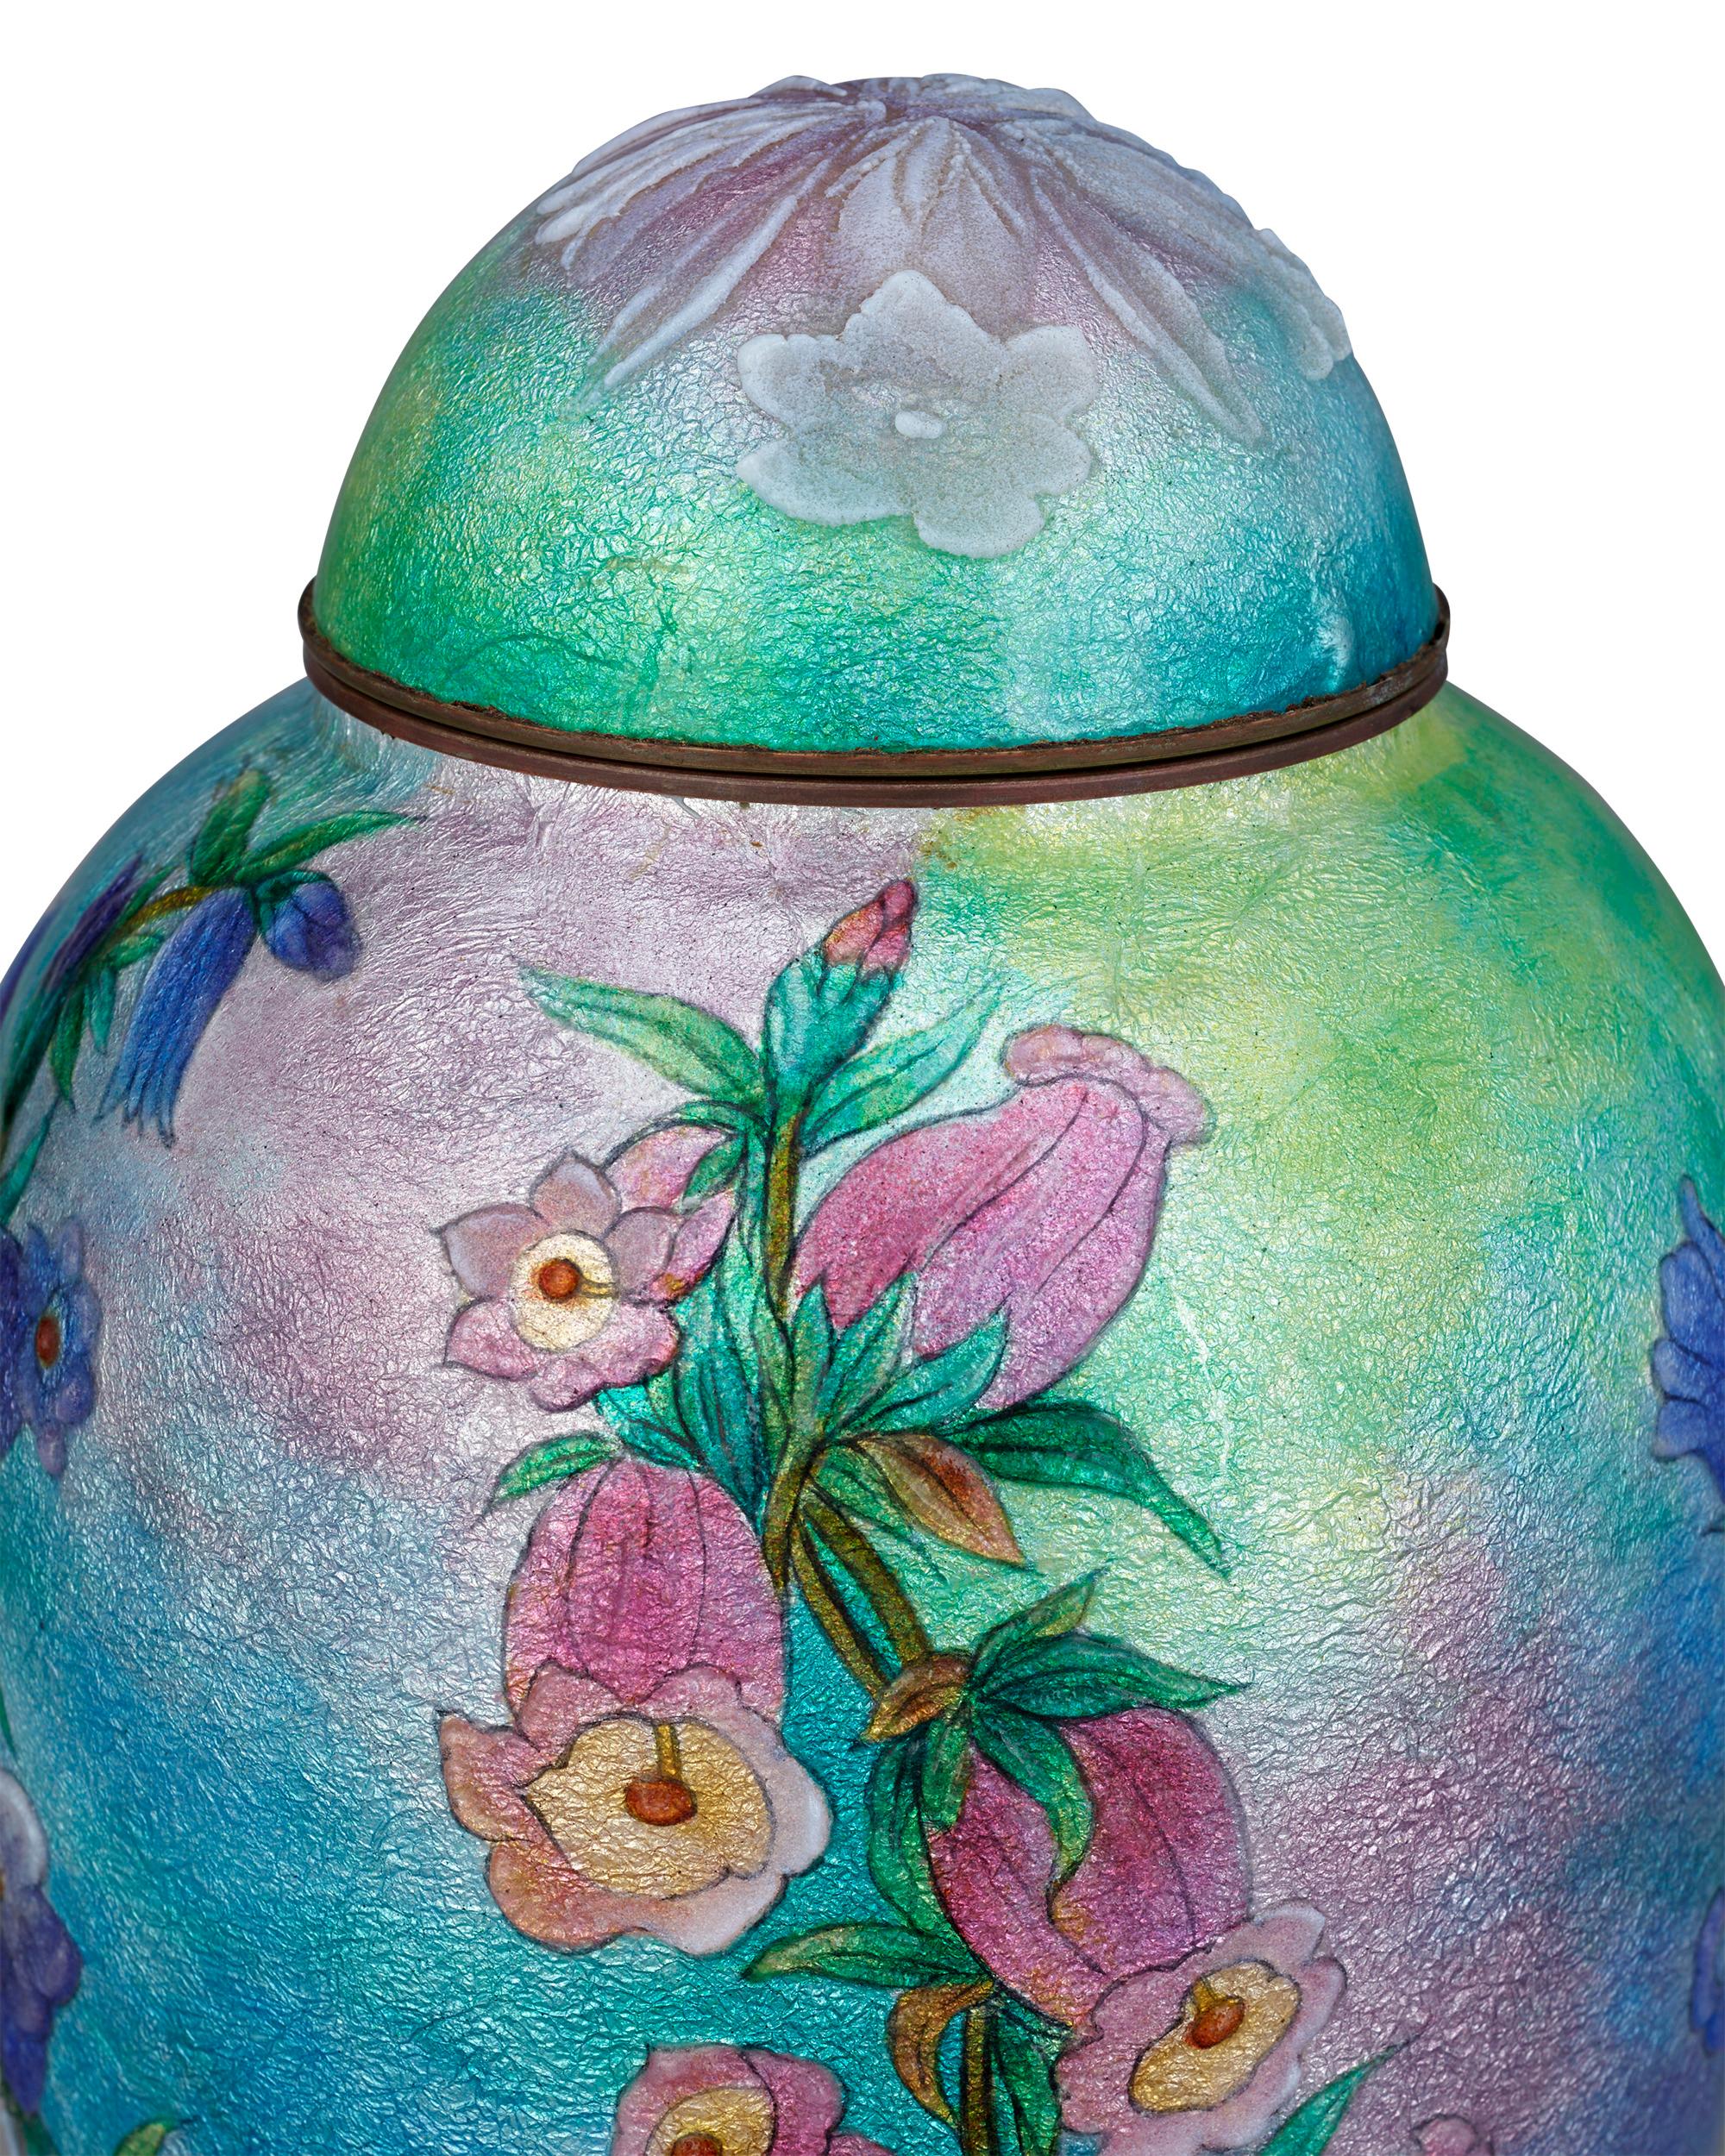 Delicate pink flowers seem to burst forth from this blue Limoges enameled vase by Camille Fauré, decorated with vibrant snapdragon motifs. Layers upon layers of brightly hued enamel with expertly etched lines were applied to a copper vase form to